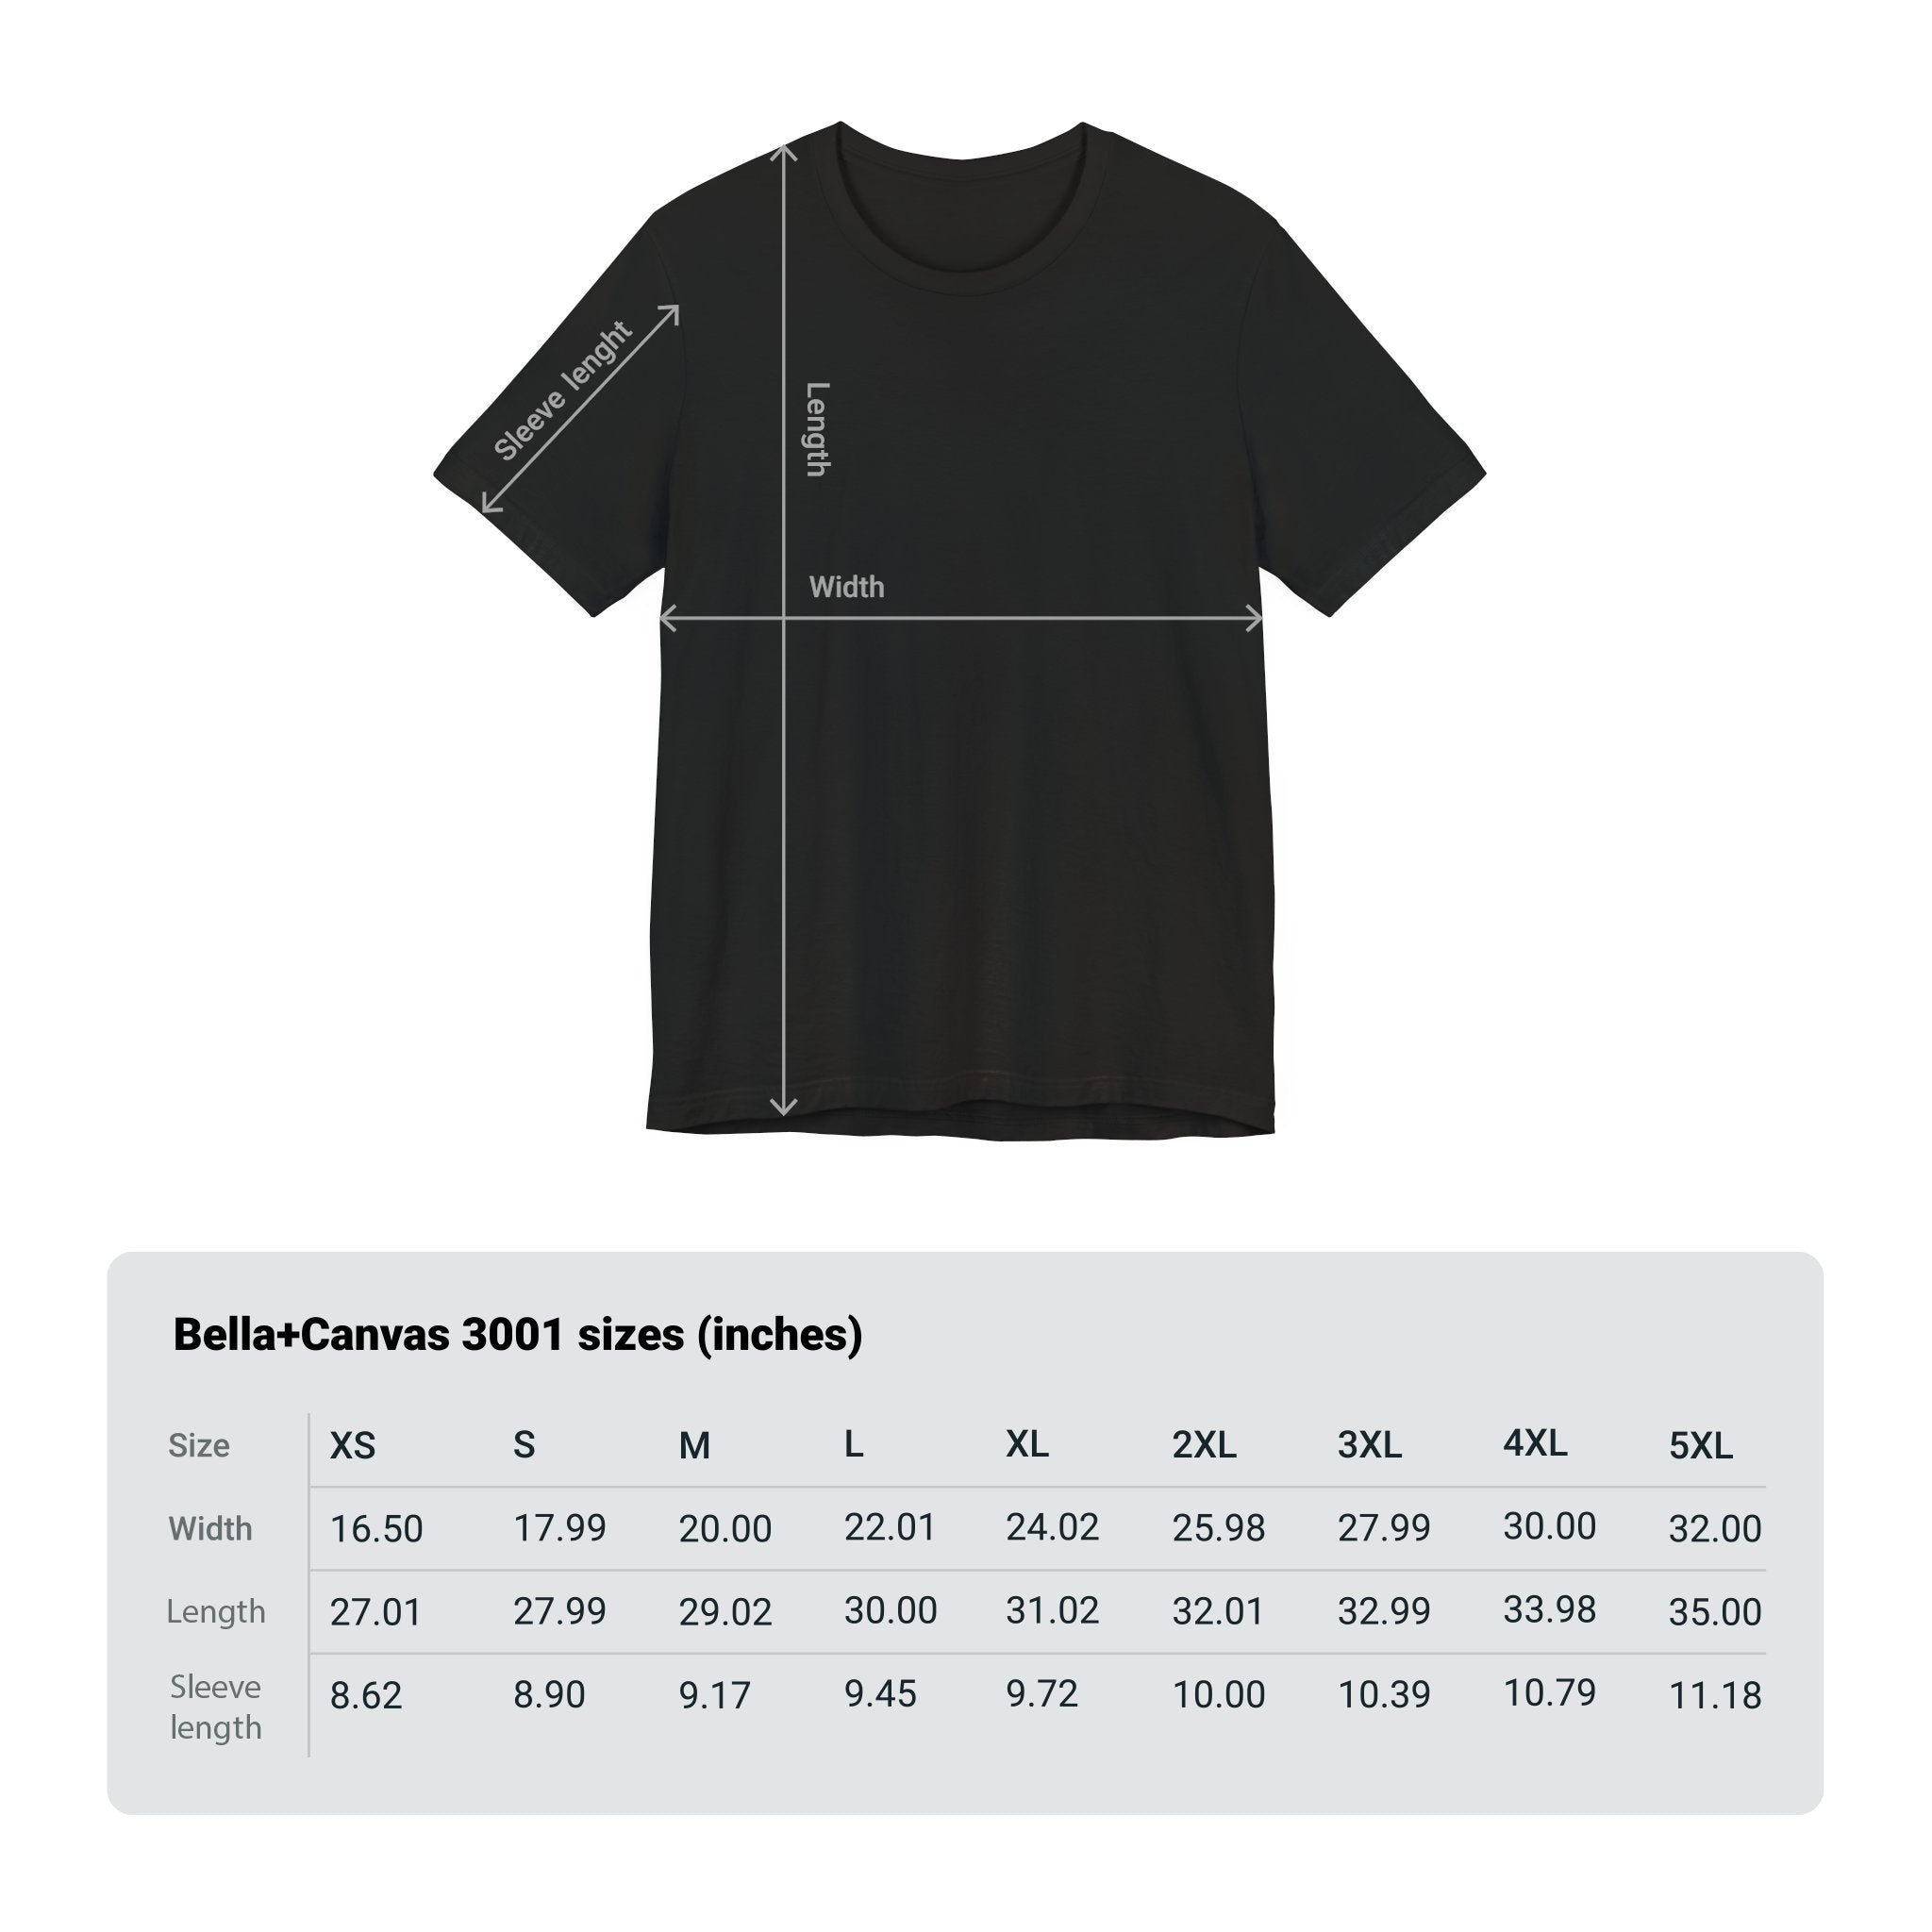 Coding Samurai T-Shirt with size chart measurements displayed for various sizes from XS to 5XL, made from breathable Airlume combed cotton.